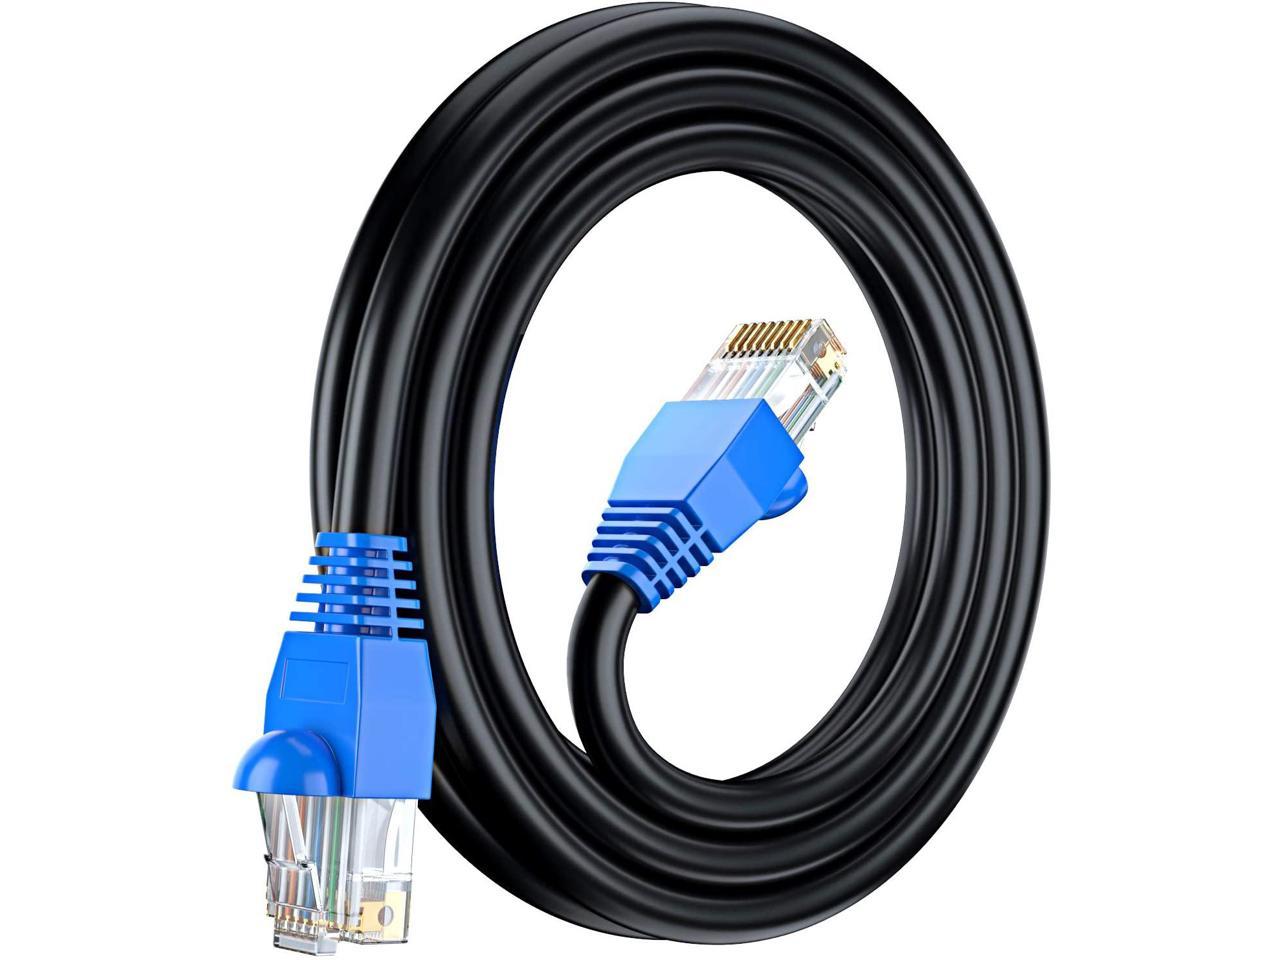 Waterproof Ethernet Cable Suitable for Direct Burial Installations. 75ft – Black Zero Lag Pure Copper 550Mhz Maximm Cat6 Outdoor Cable 